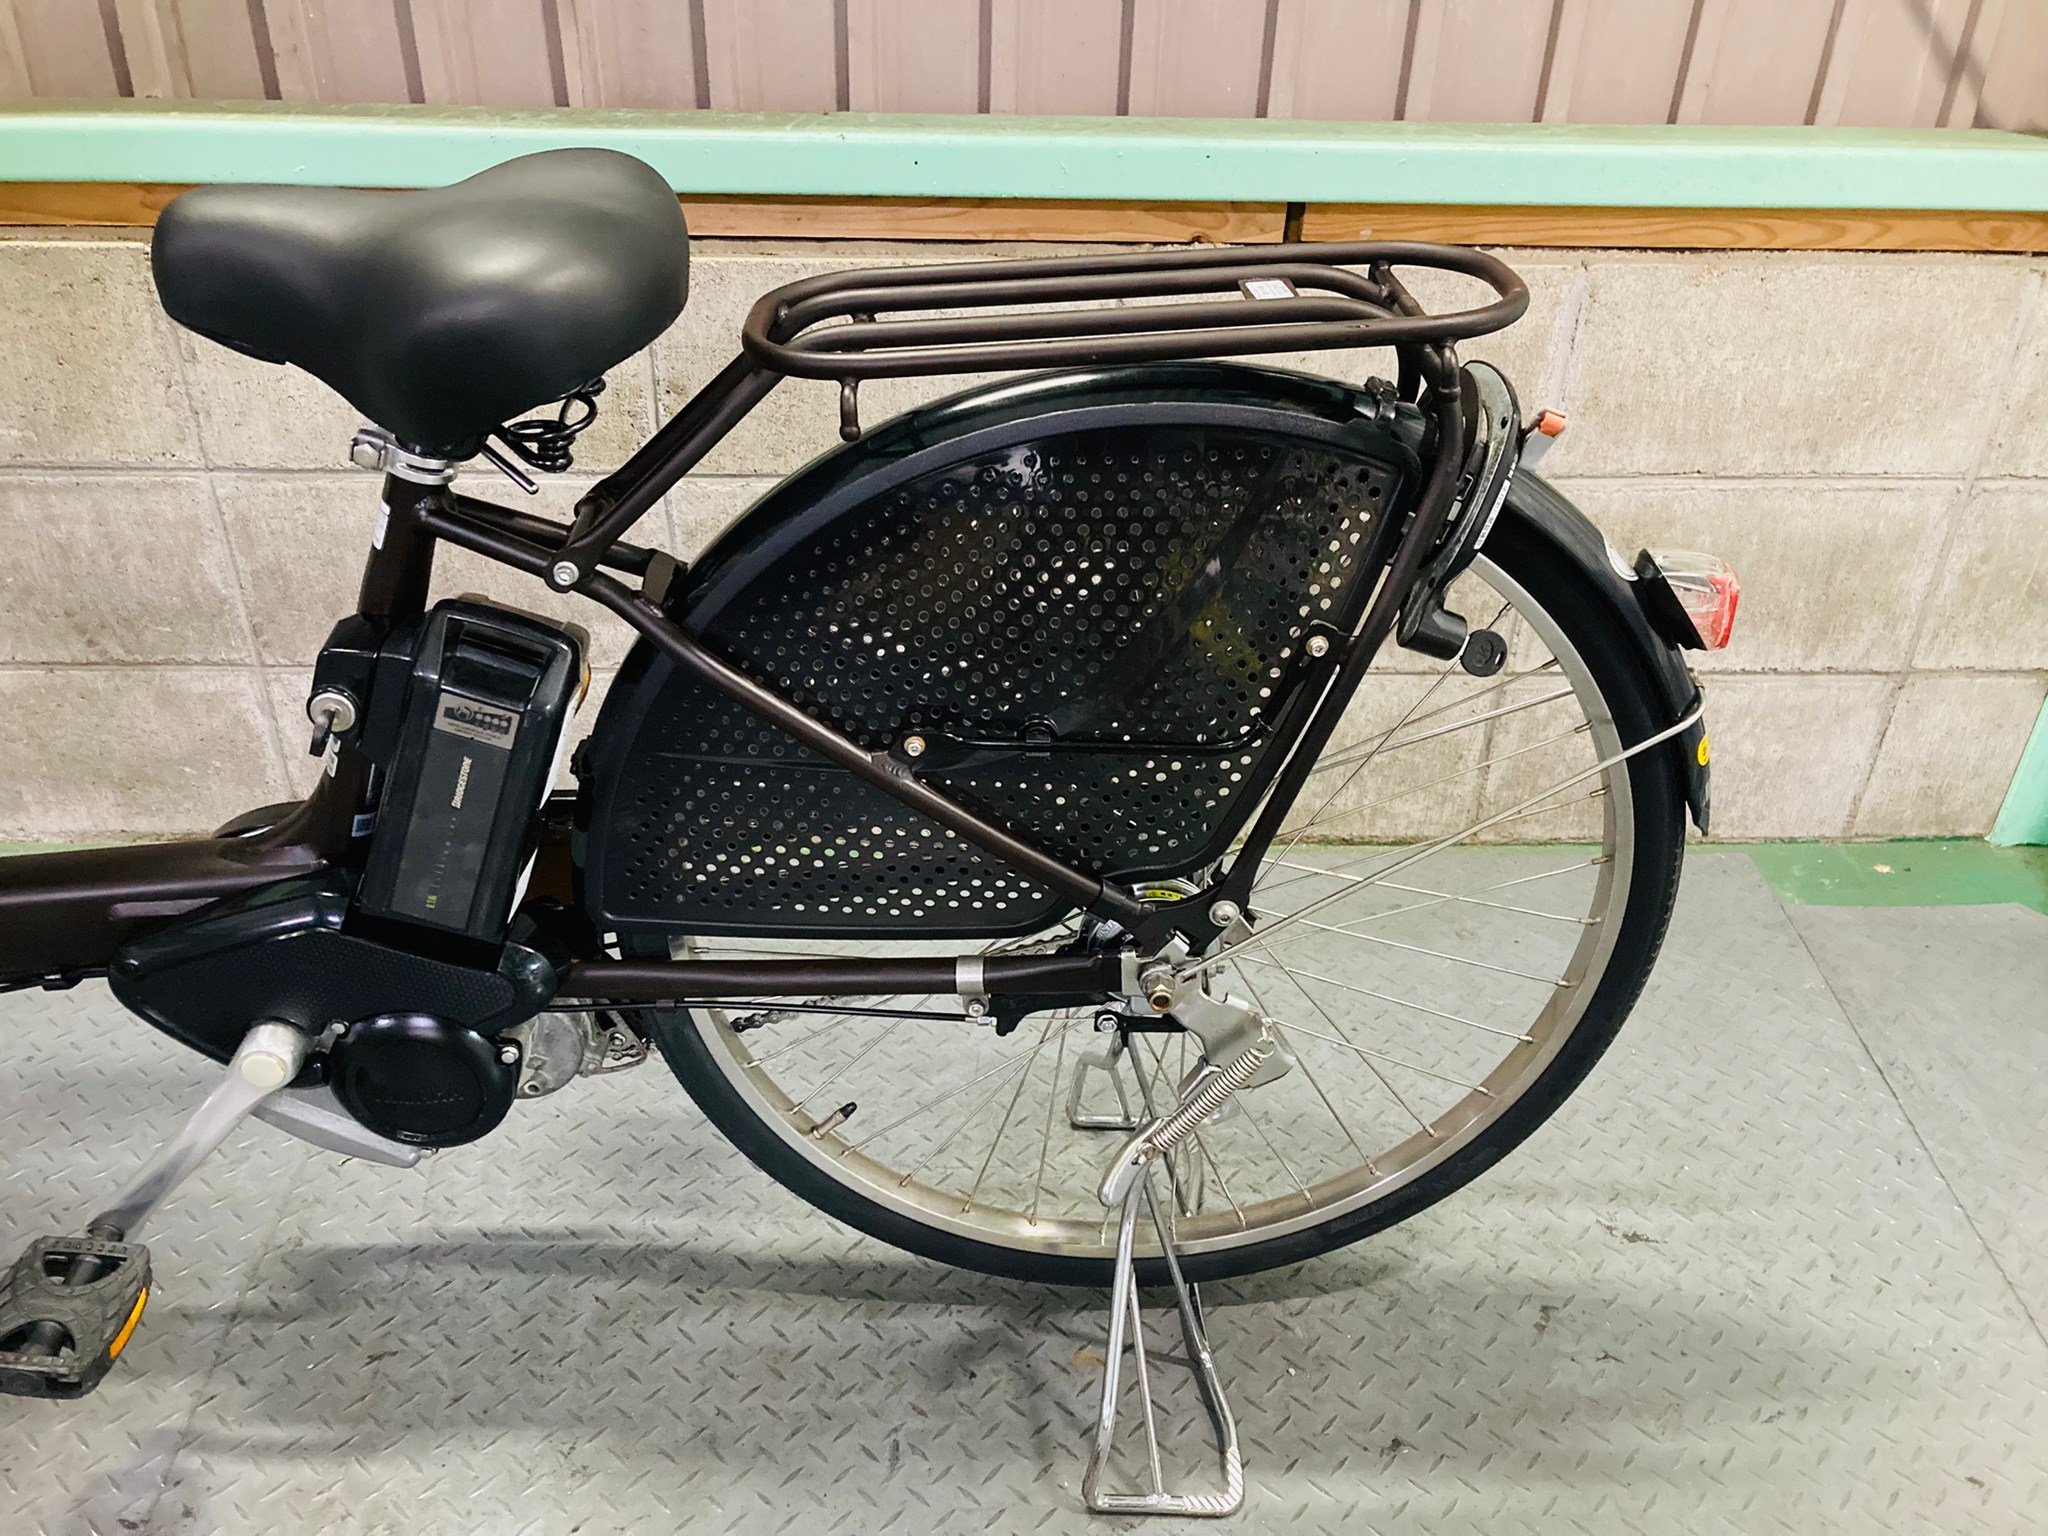 SOLD OUT】電動自転車 ブリヂストン アンジェリーノ 22/26インチ 8.7ah 